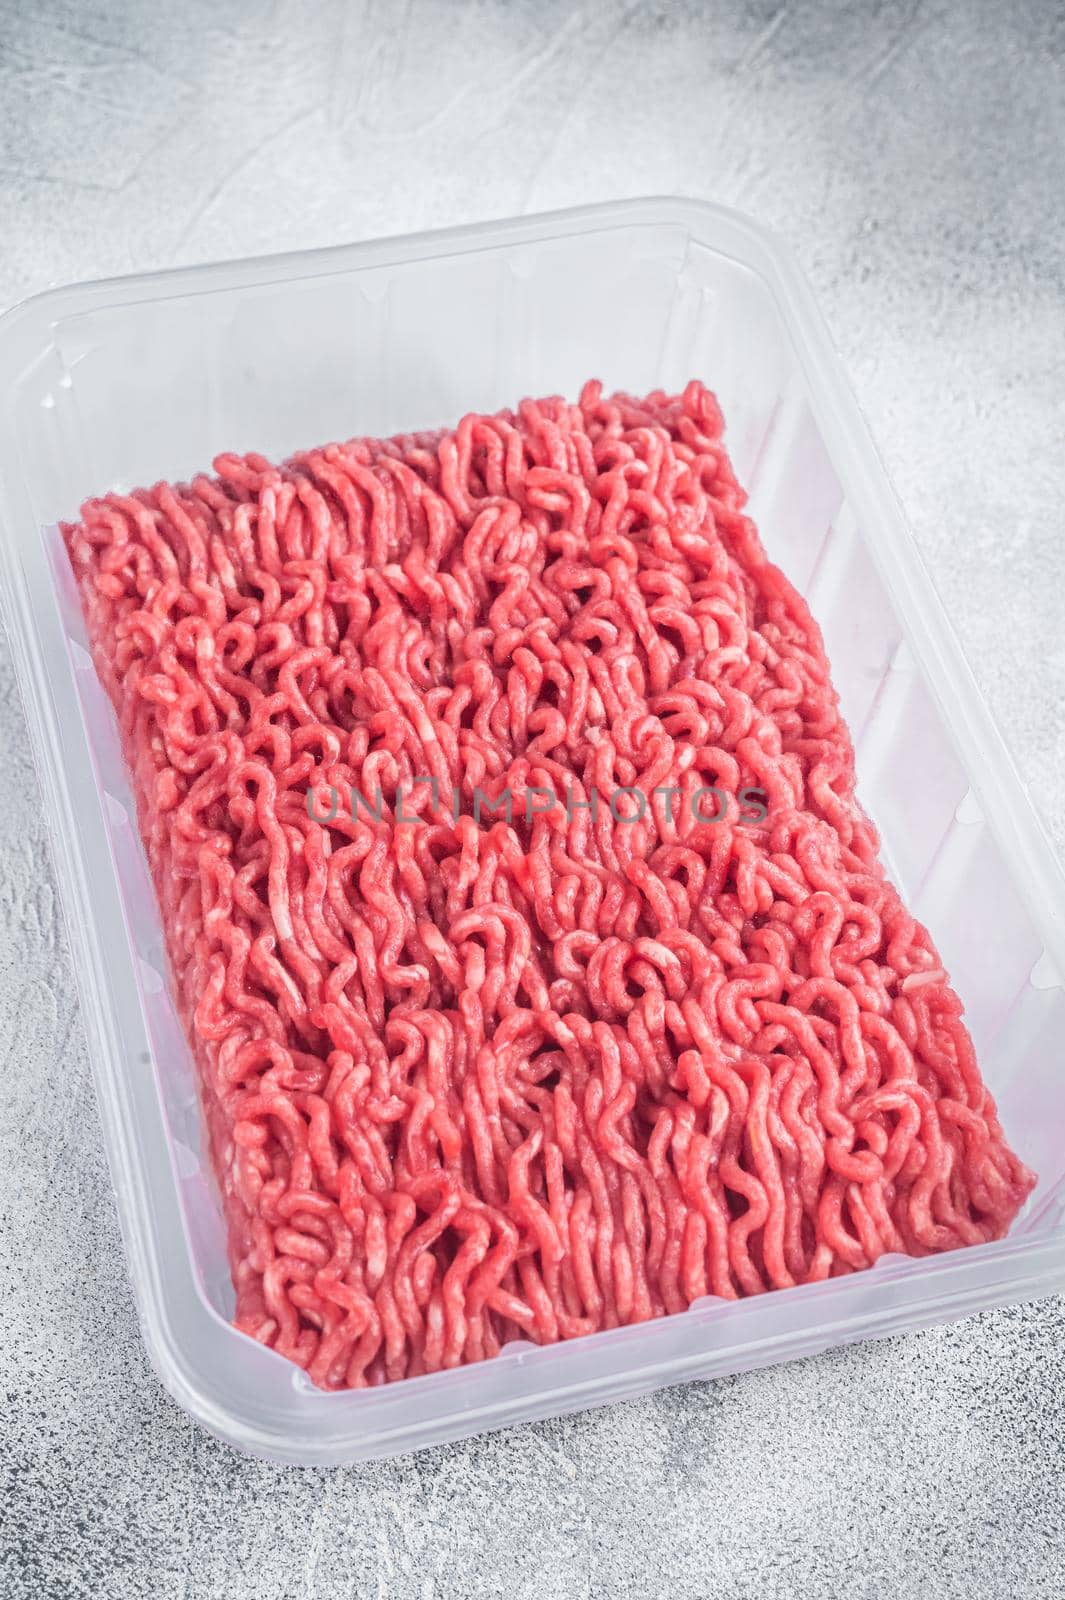 Raw ground beef and pork meat in vacuum packaging from super market. White background. Top view.